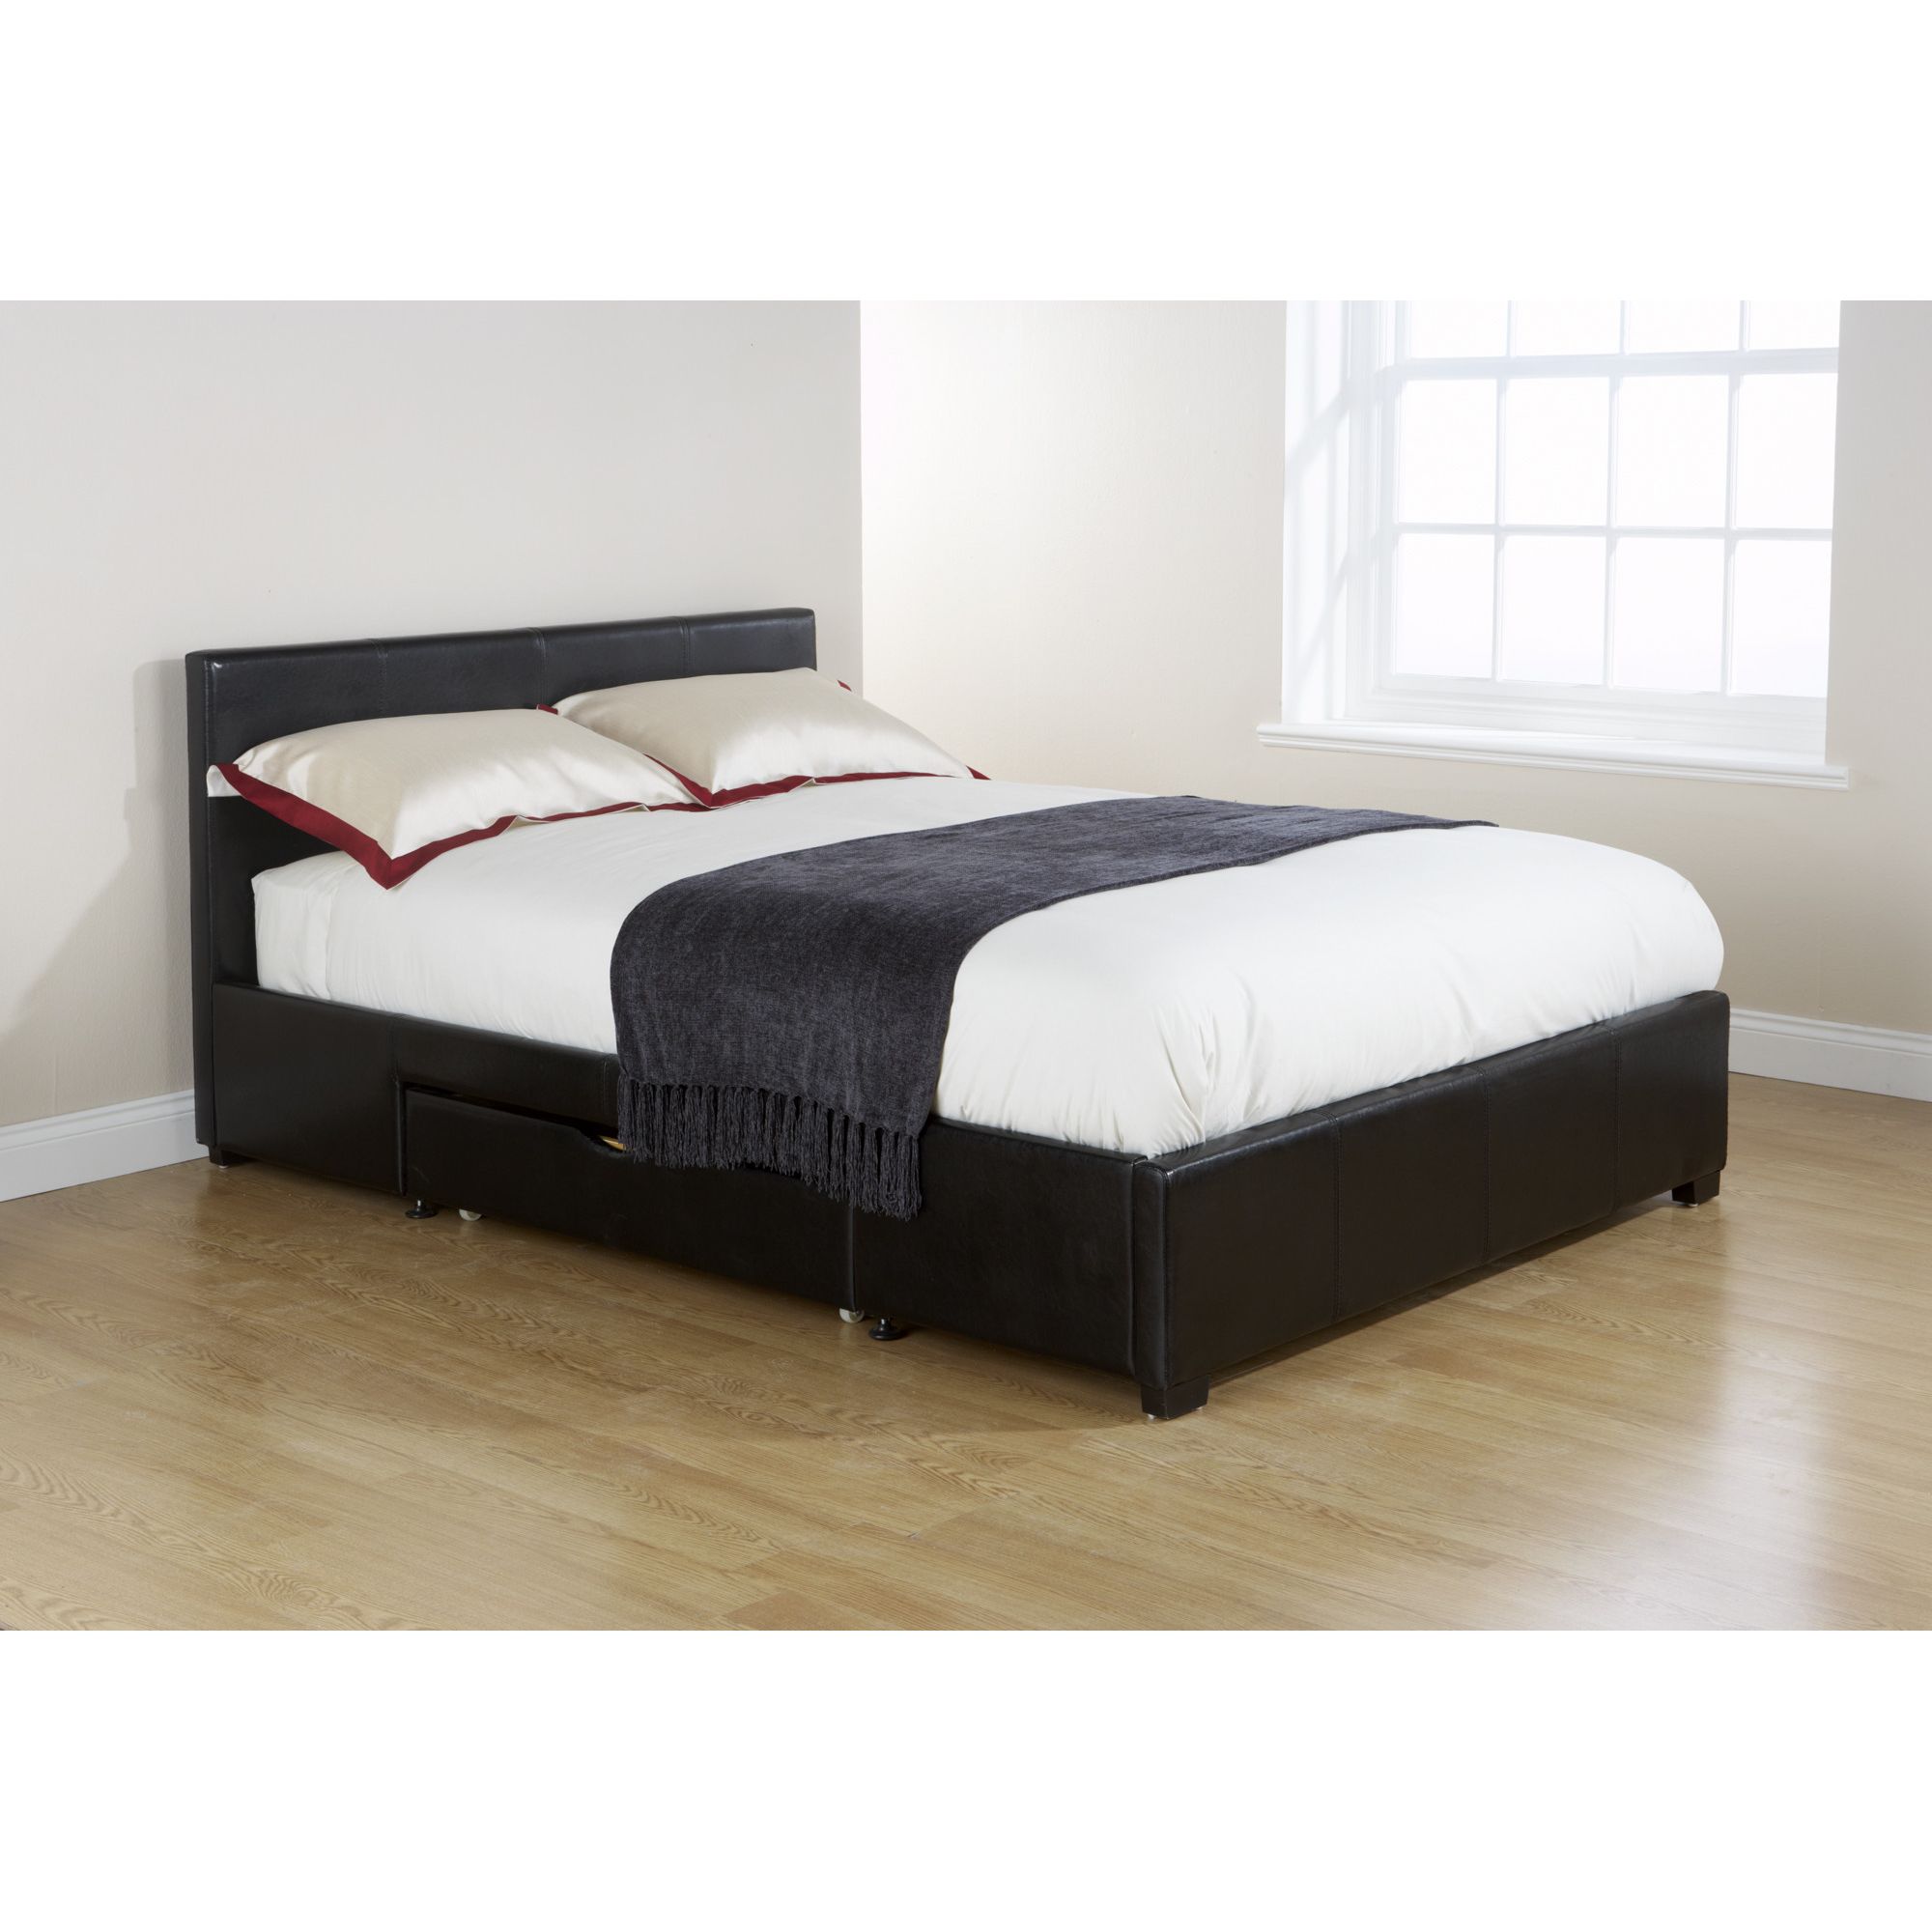 Elements Bristol Drawer Double Bed at Tesco Direct